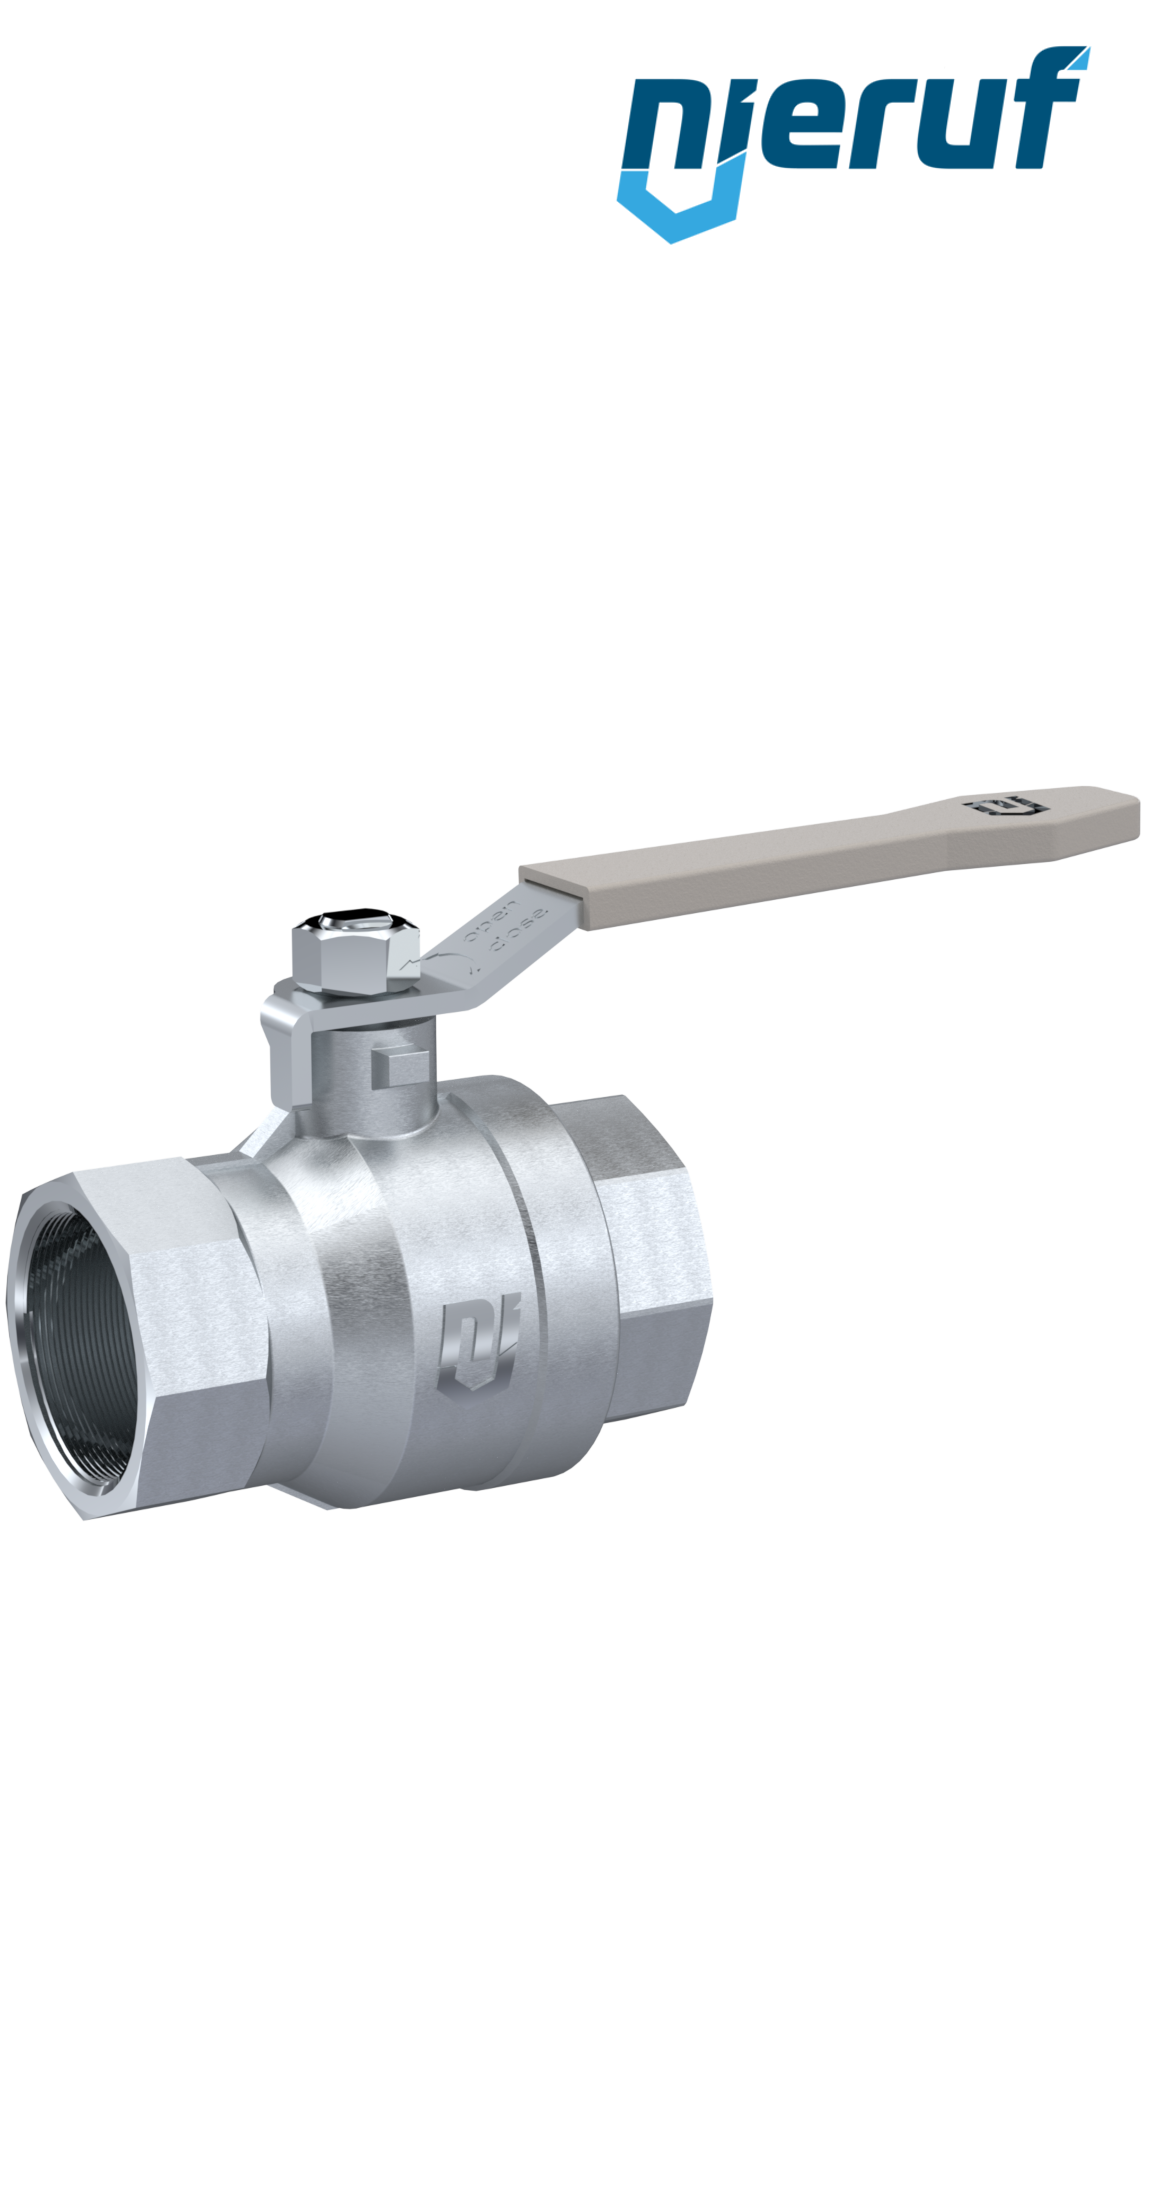 Reasonably priced ball valves fast delivery